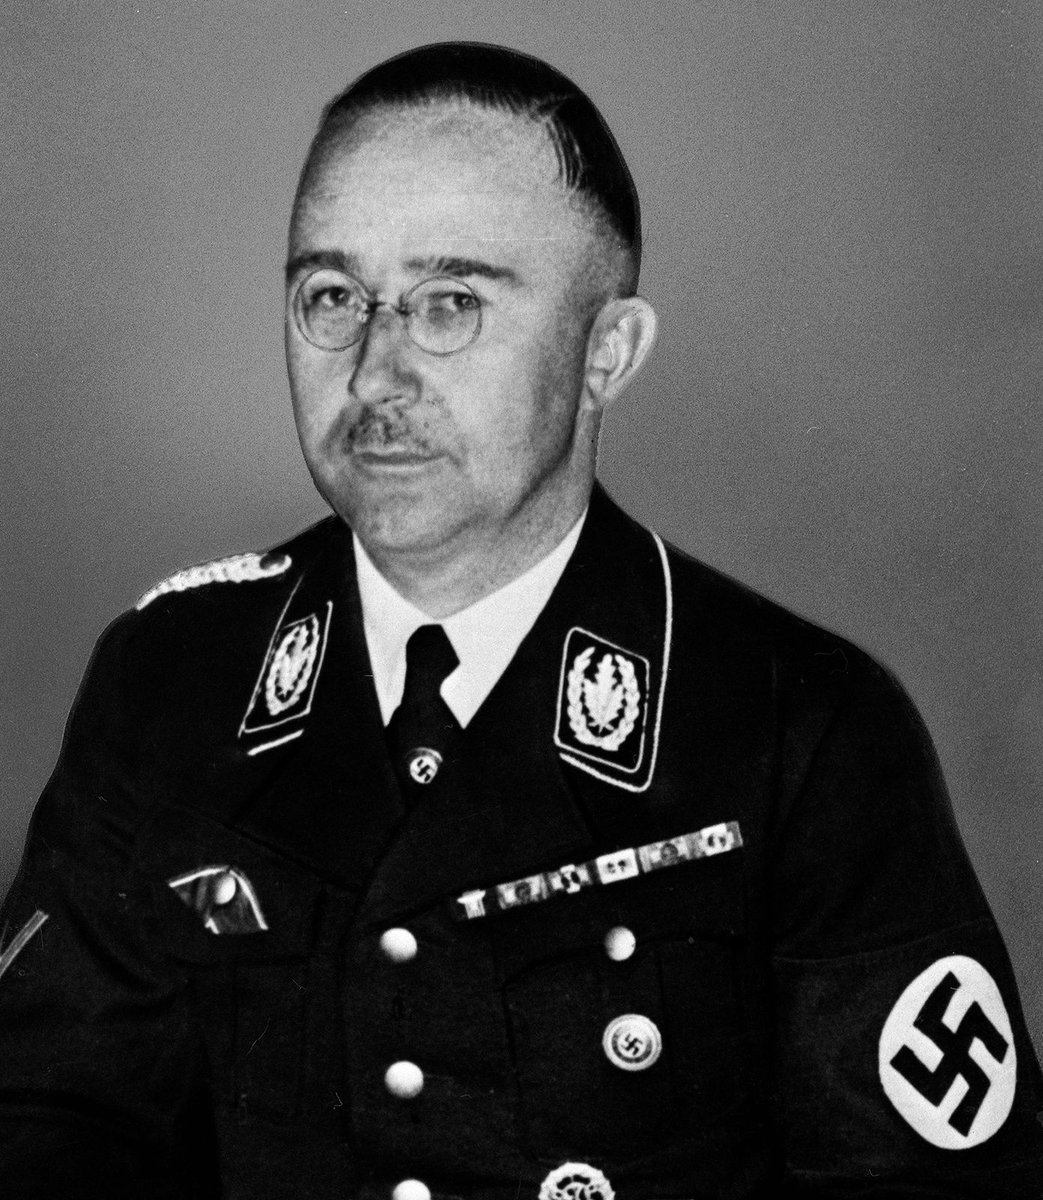 #OTD May 23, 1945, Heinrich Himmler, chief of the SS, assistant chief of the Gestapo, and architect of Hitler’s program to exterminate European Jews, dies by suicide one day after being arrested by the British